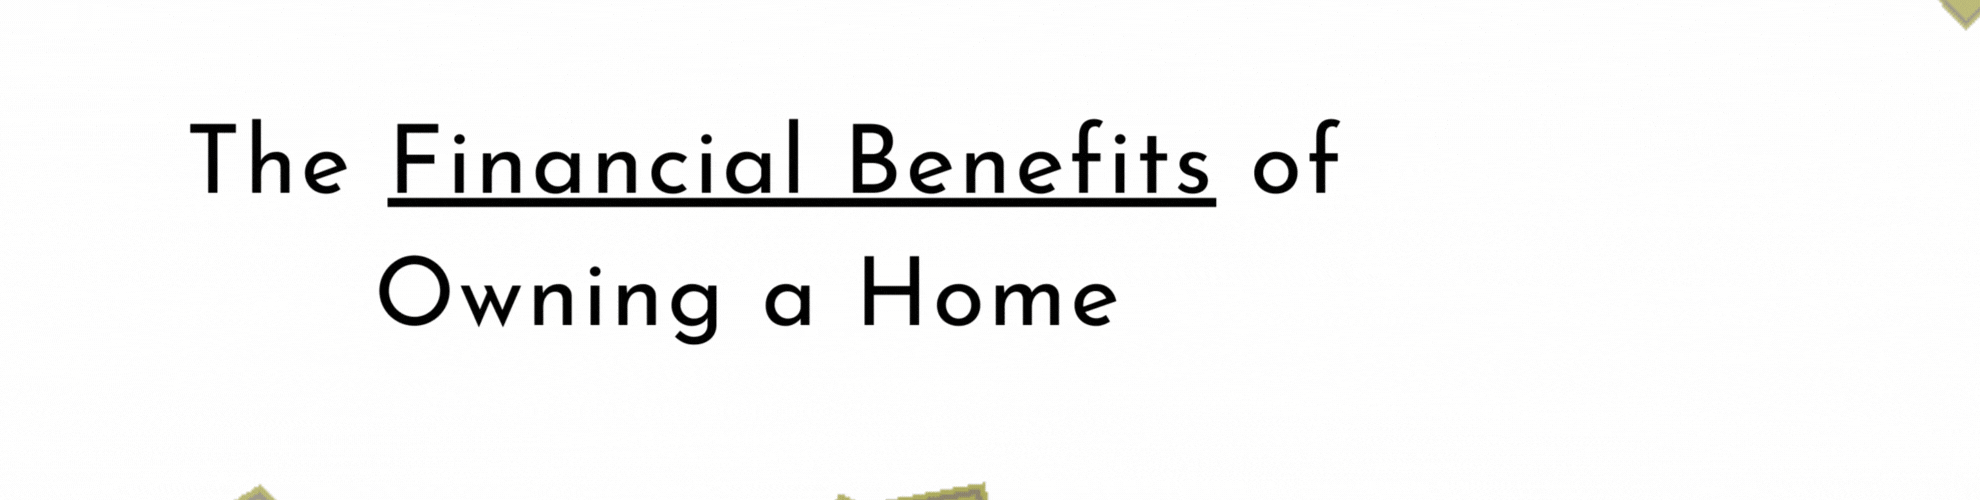 The Financial Benefits of Owning a Home 